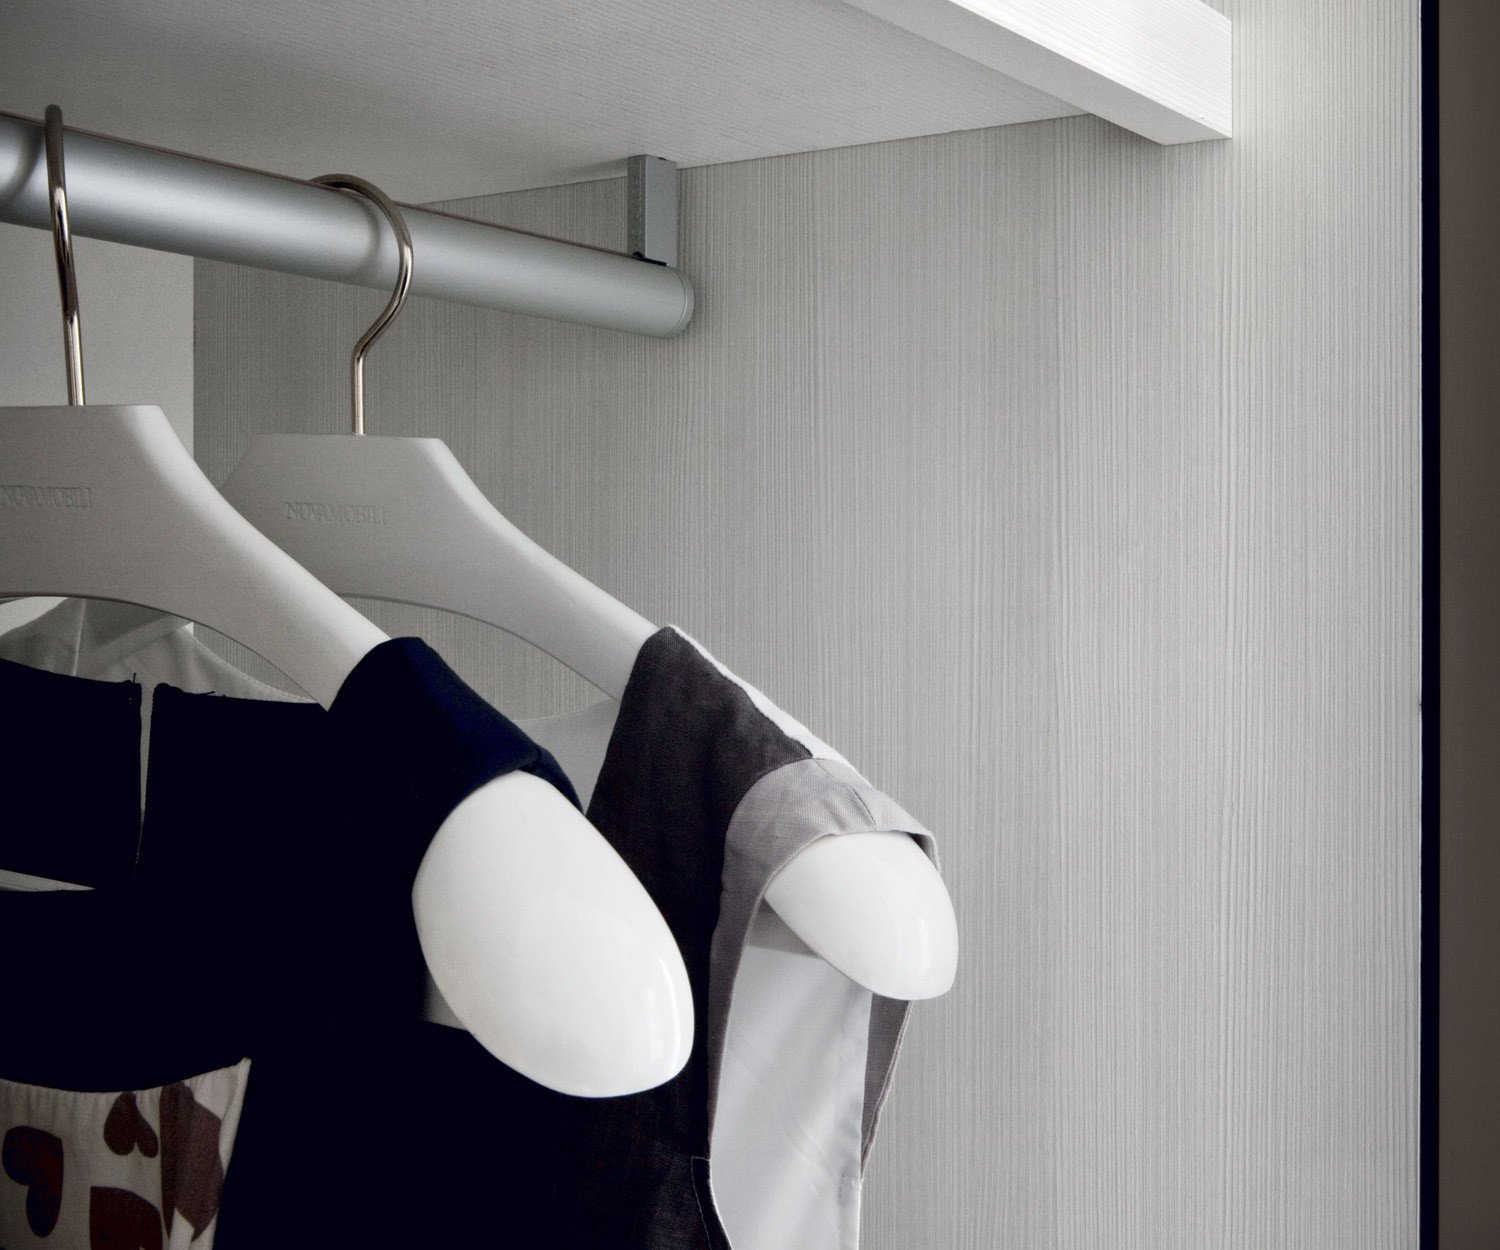 Details of the Armadi Magnum clothes rail from Novamobili as an accessory for wardrobes